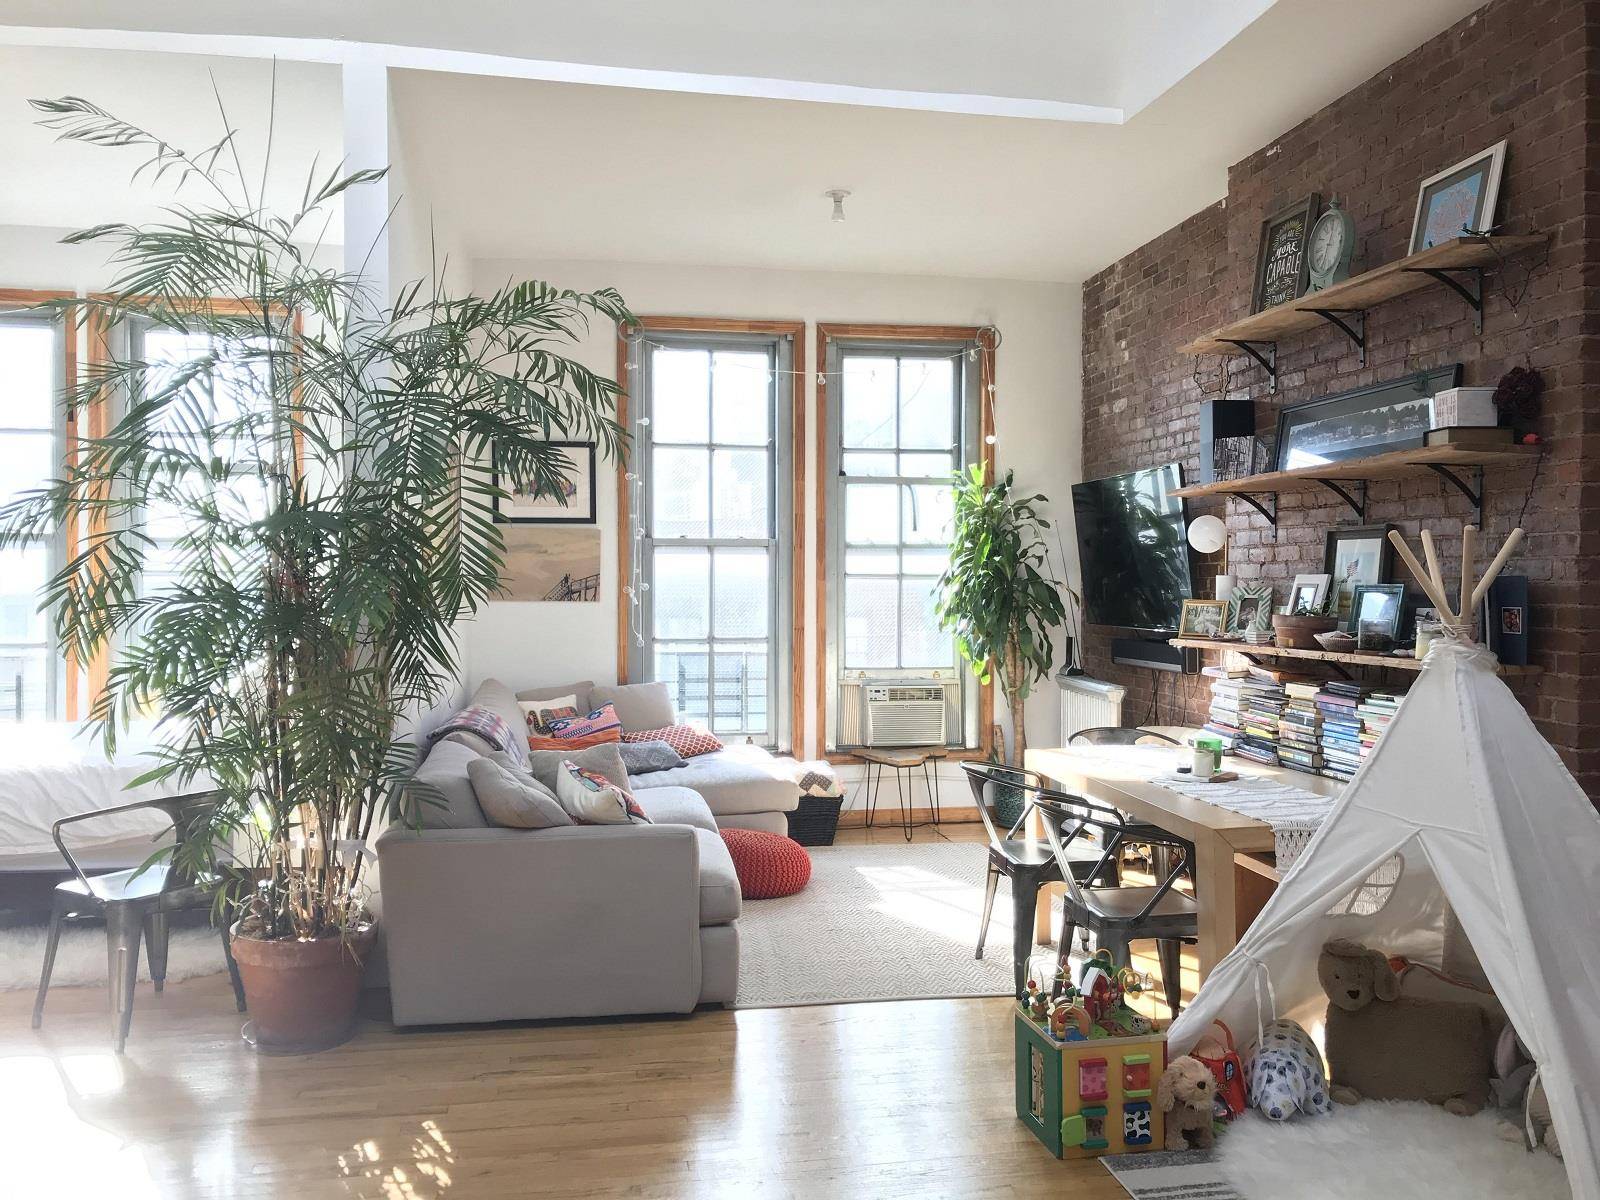 Truly One of a Kind. Oversized 1 bedroom loft, separate dining area and large living room.